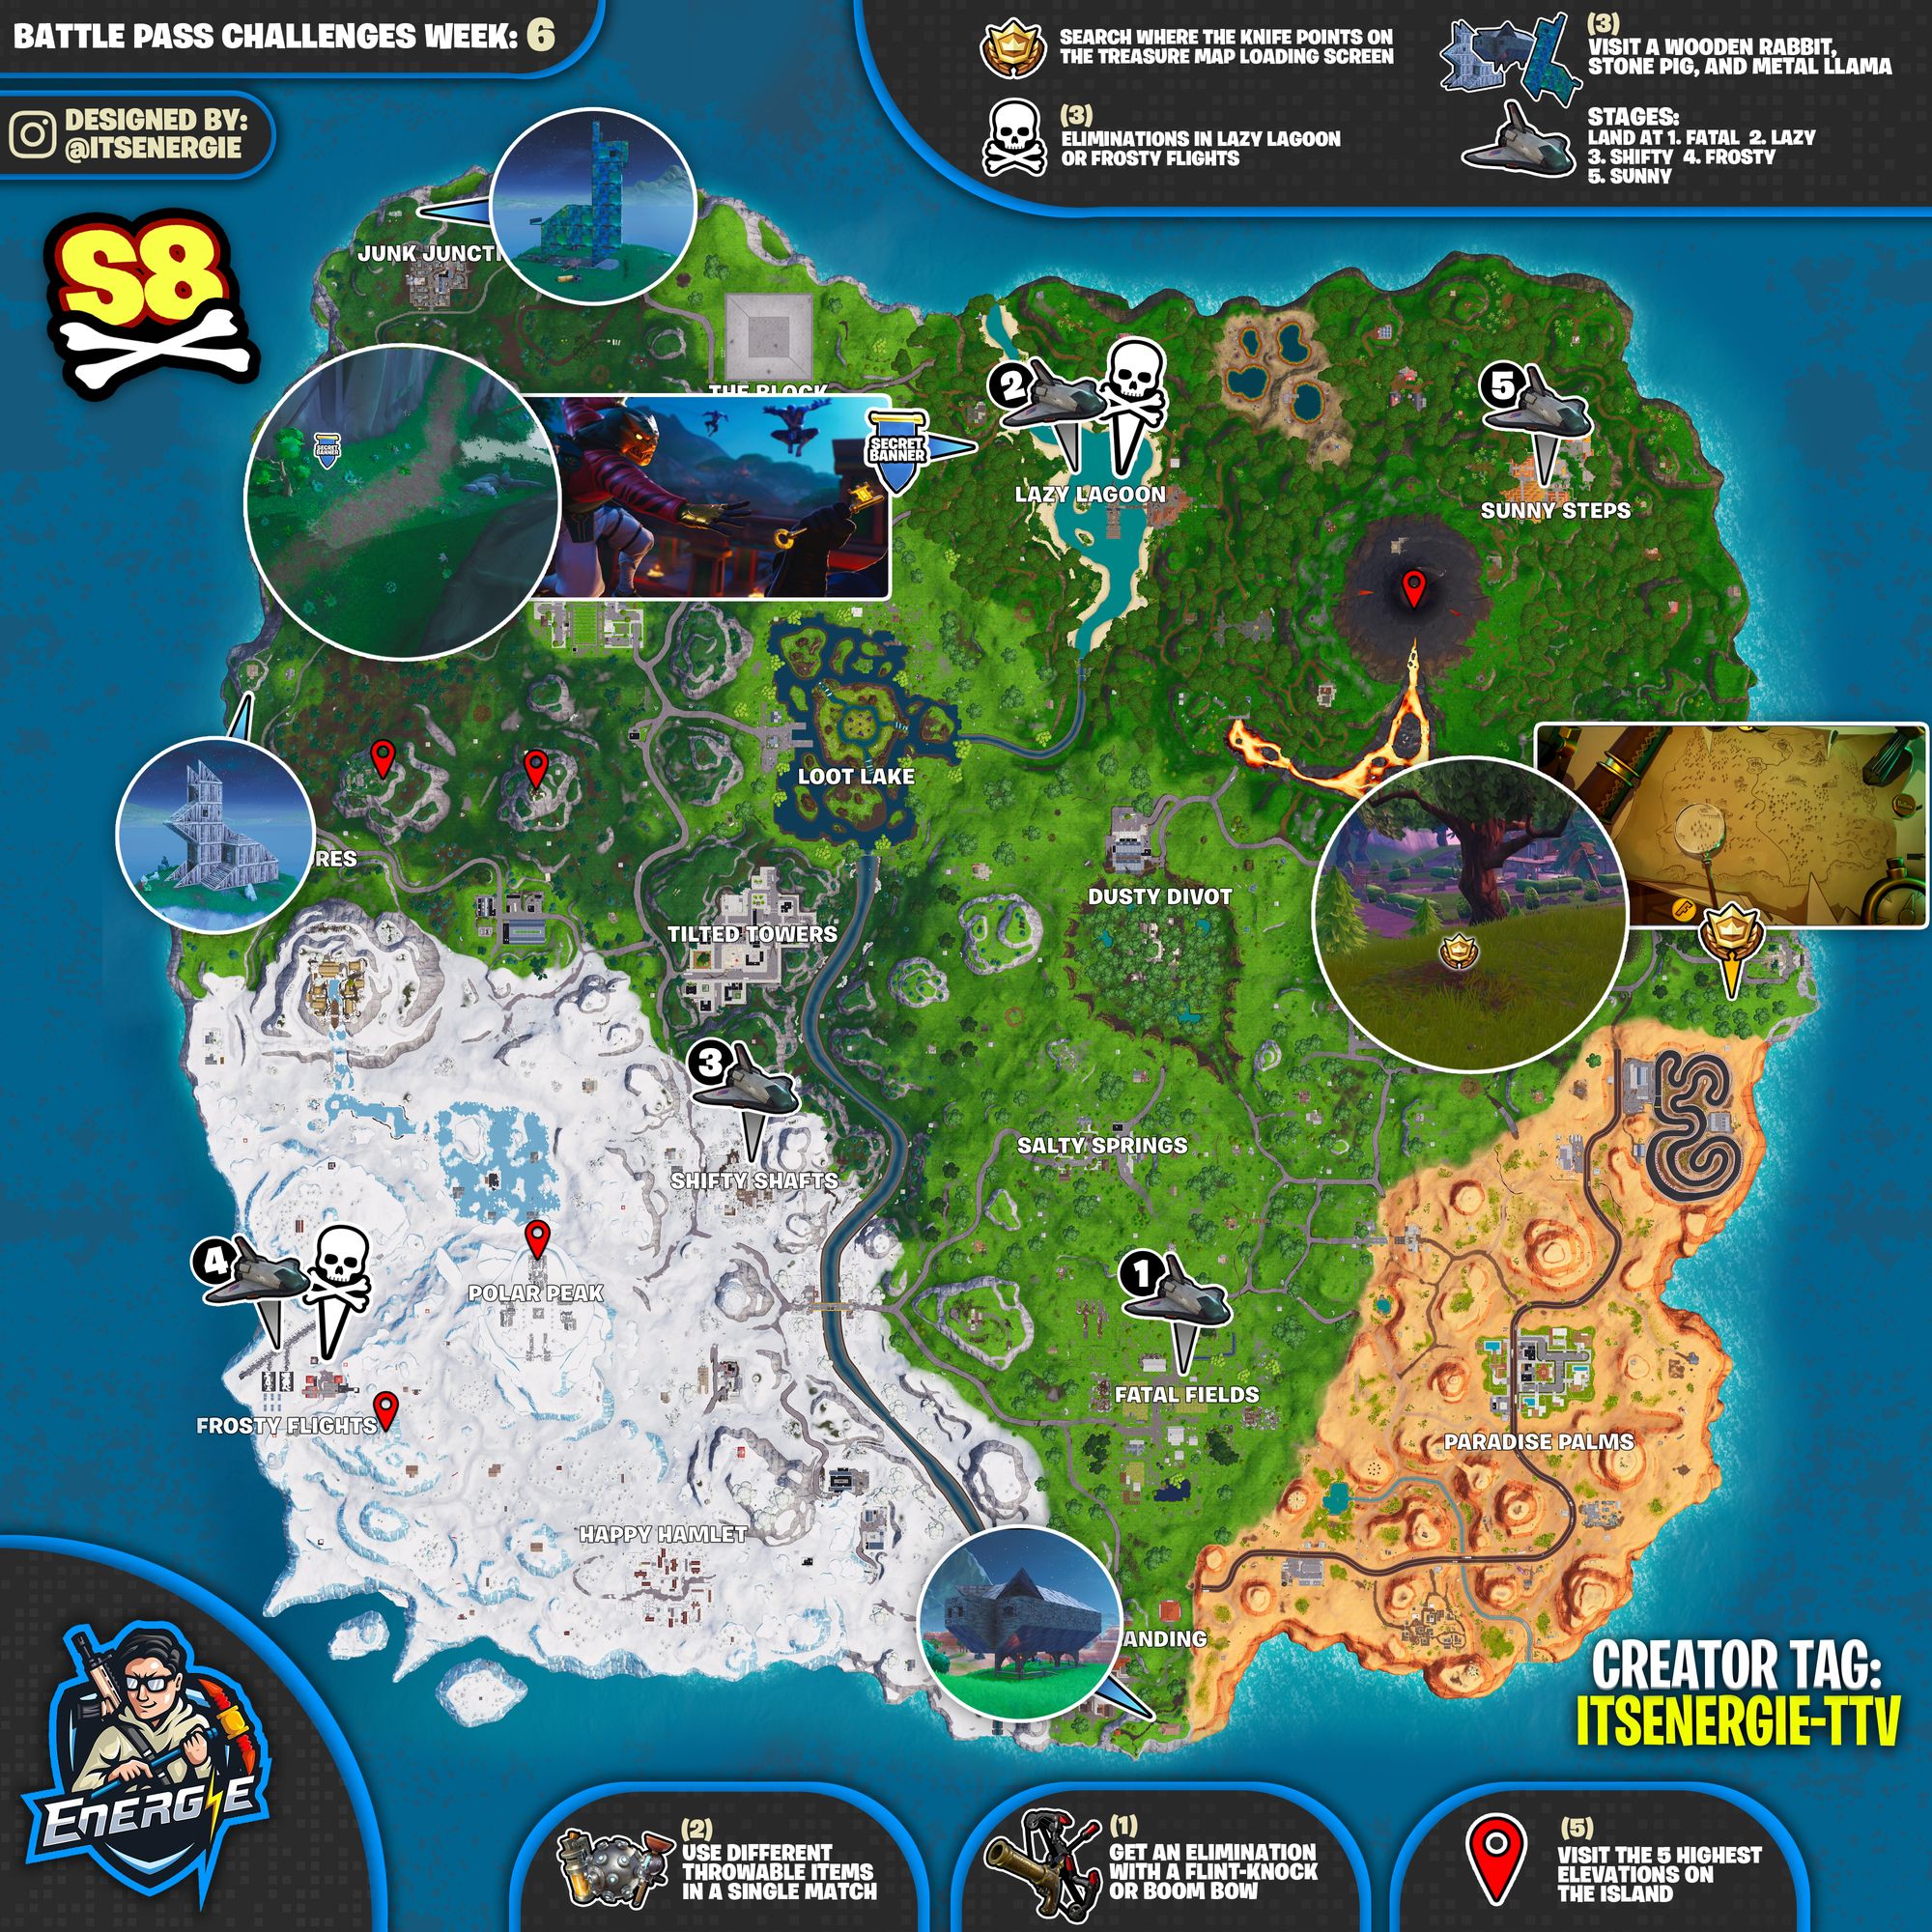 struggling with this week s challenges the cheat sheet mastermind itsenergie has put together another cheat sheet to make our lives a little bit easier - fortnite llama cheat